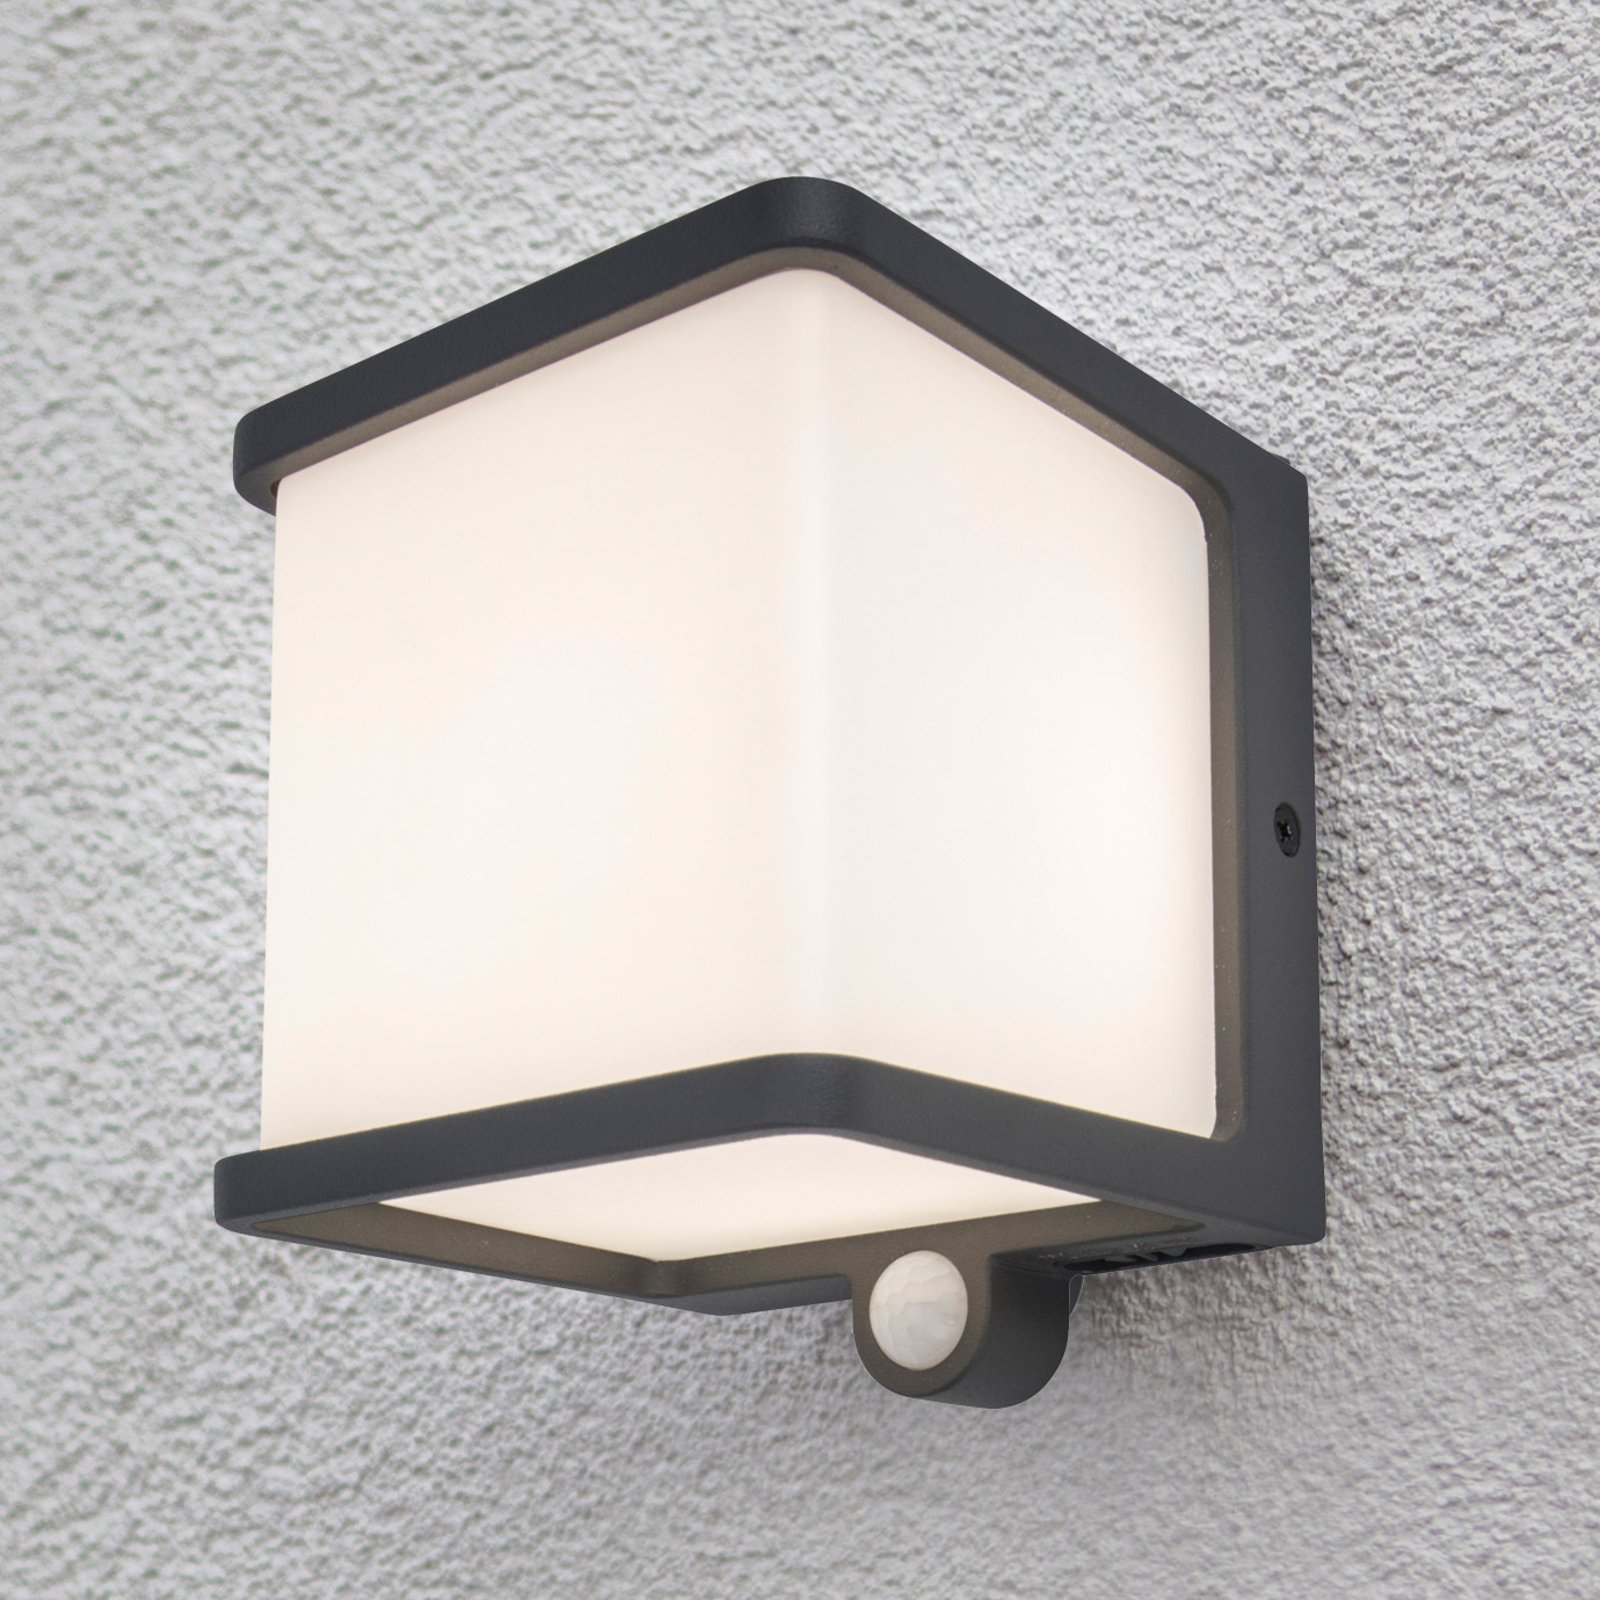 Doblo LED solar wall light with a motion detector